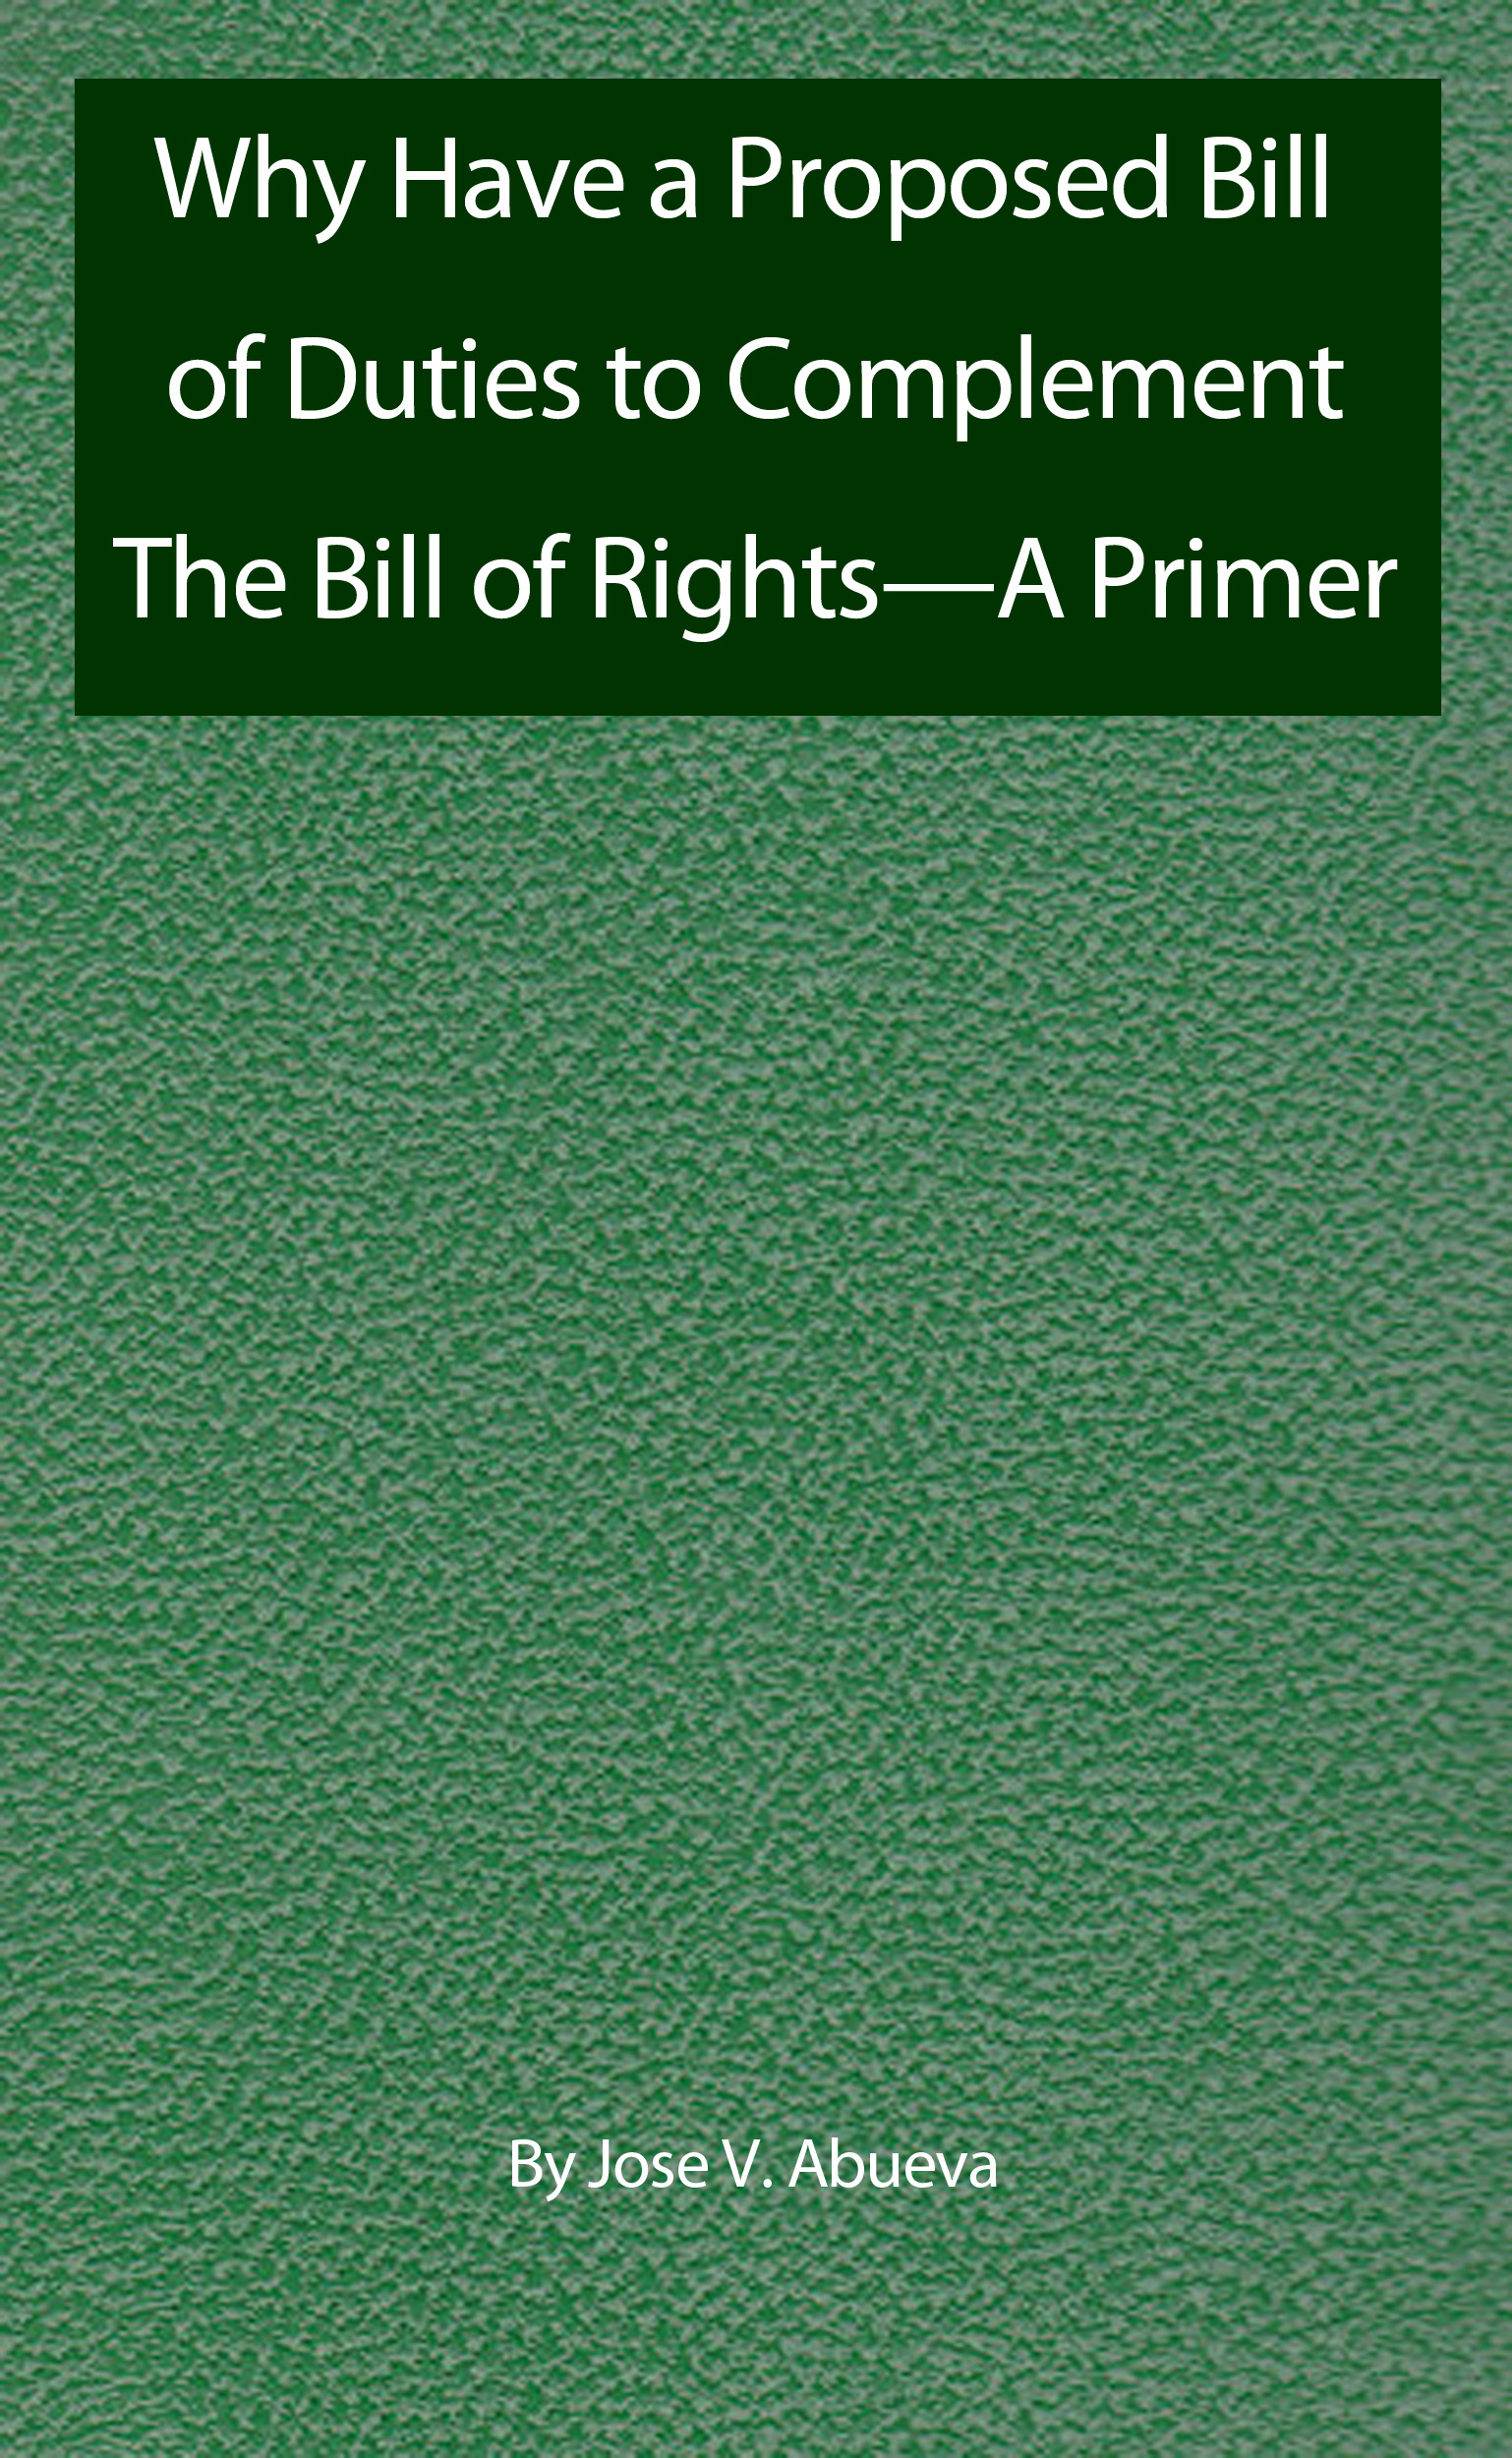 Why Have a Proposed Bill of Duties to Complement The Bill of Rights—A Primer